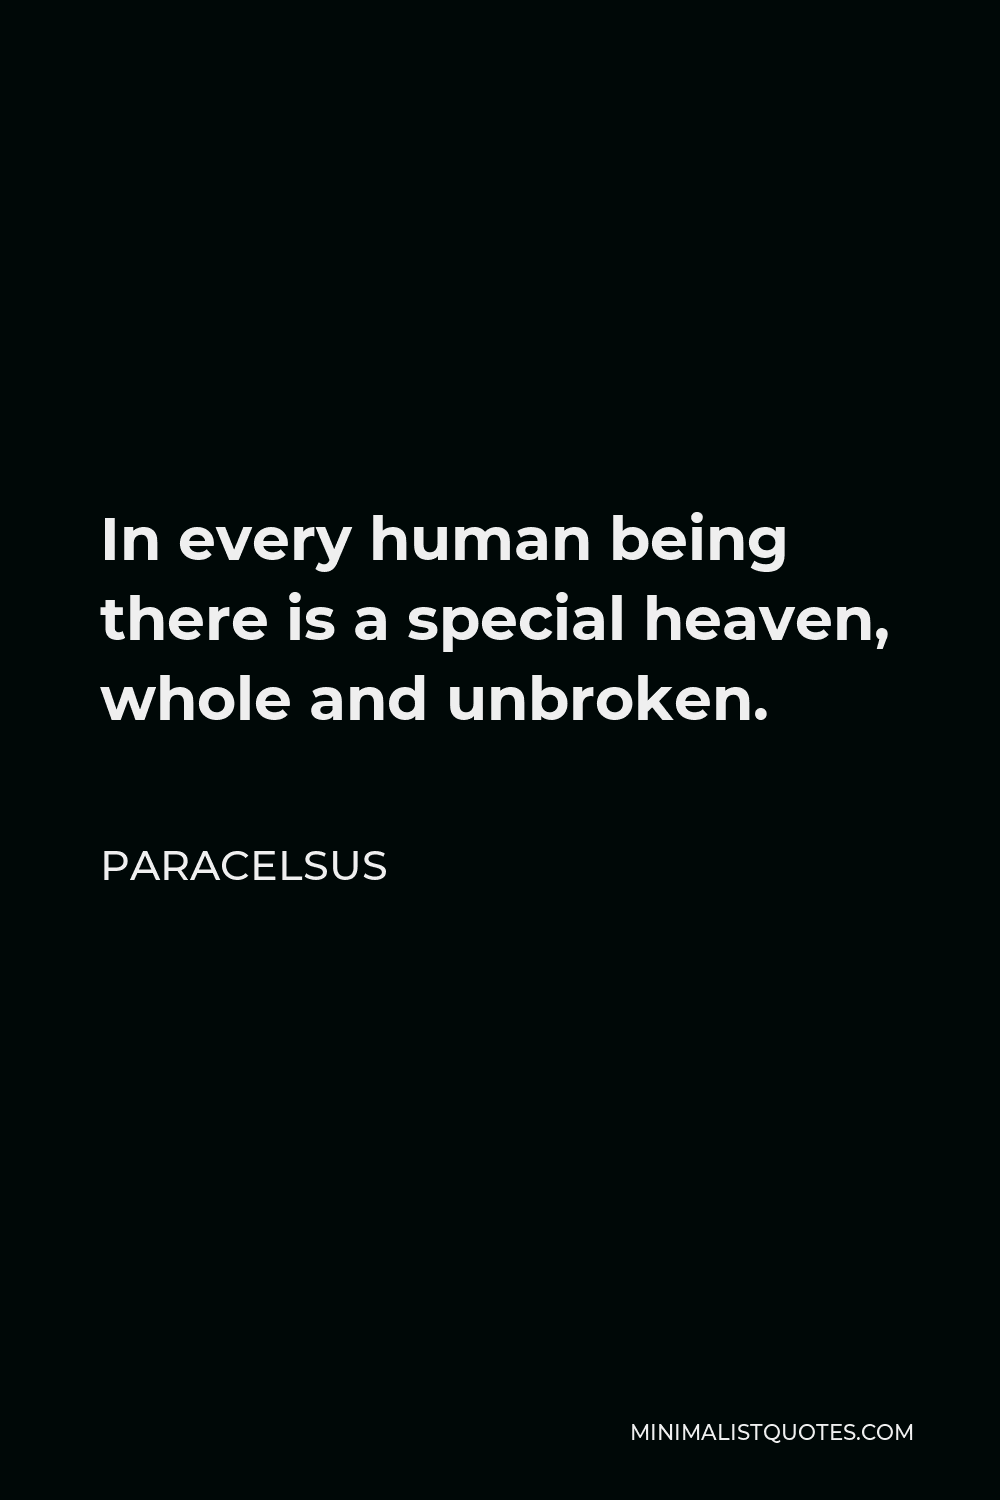 Paracelsus Quote - In every human being there is a special heaven, whole and unbroken.